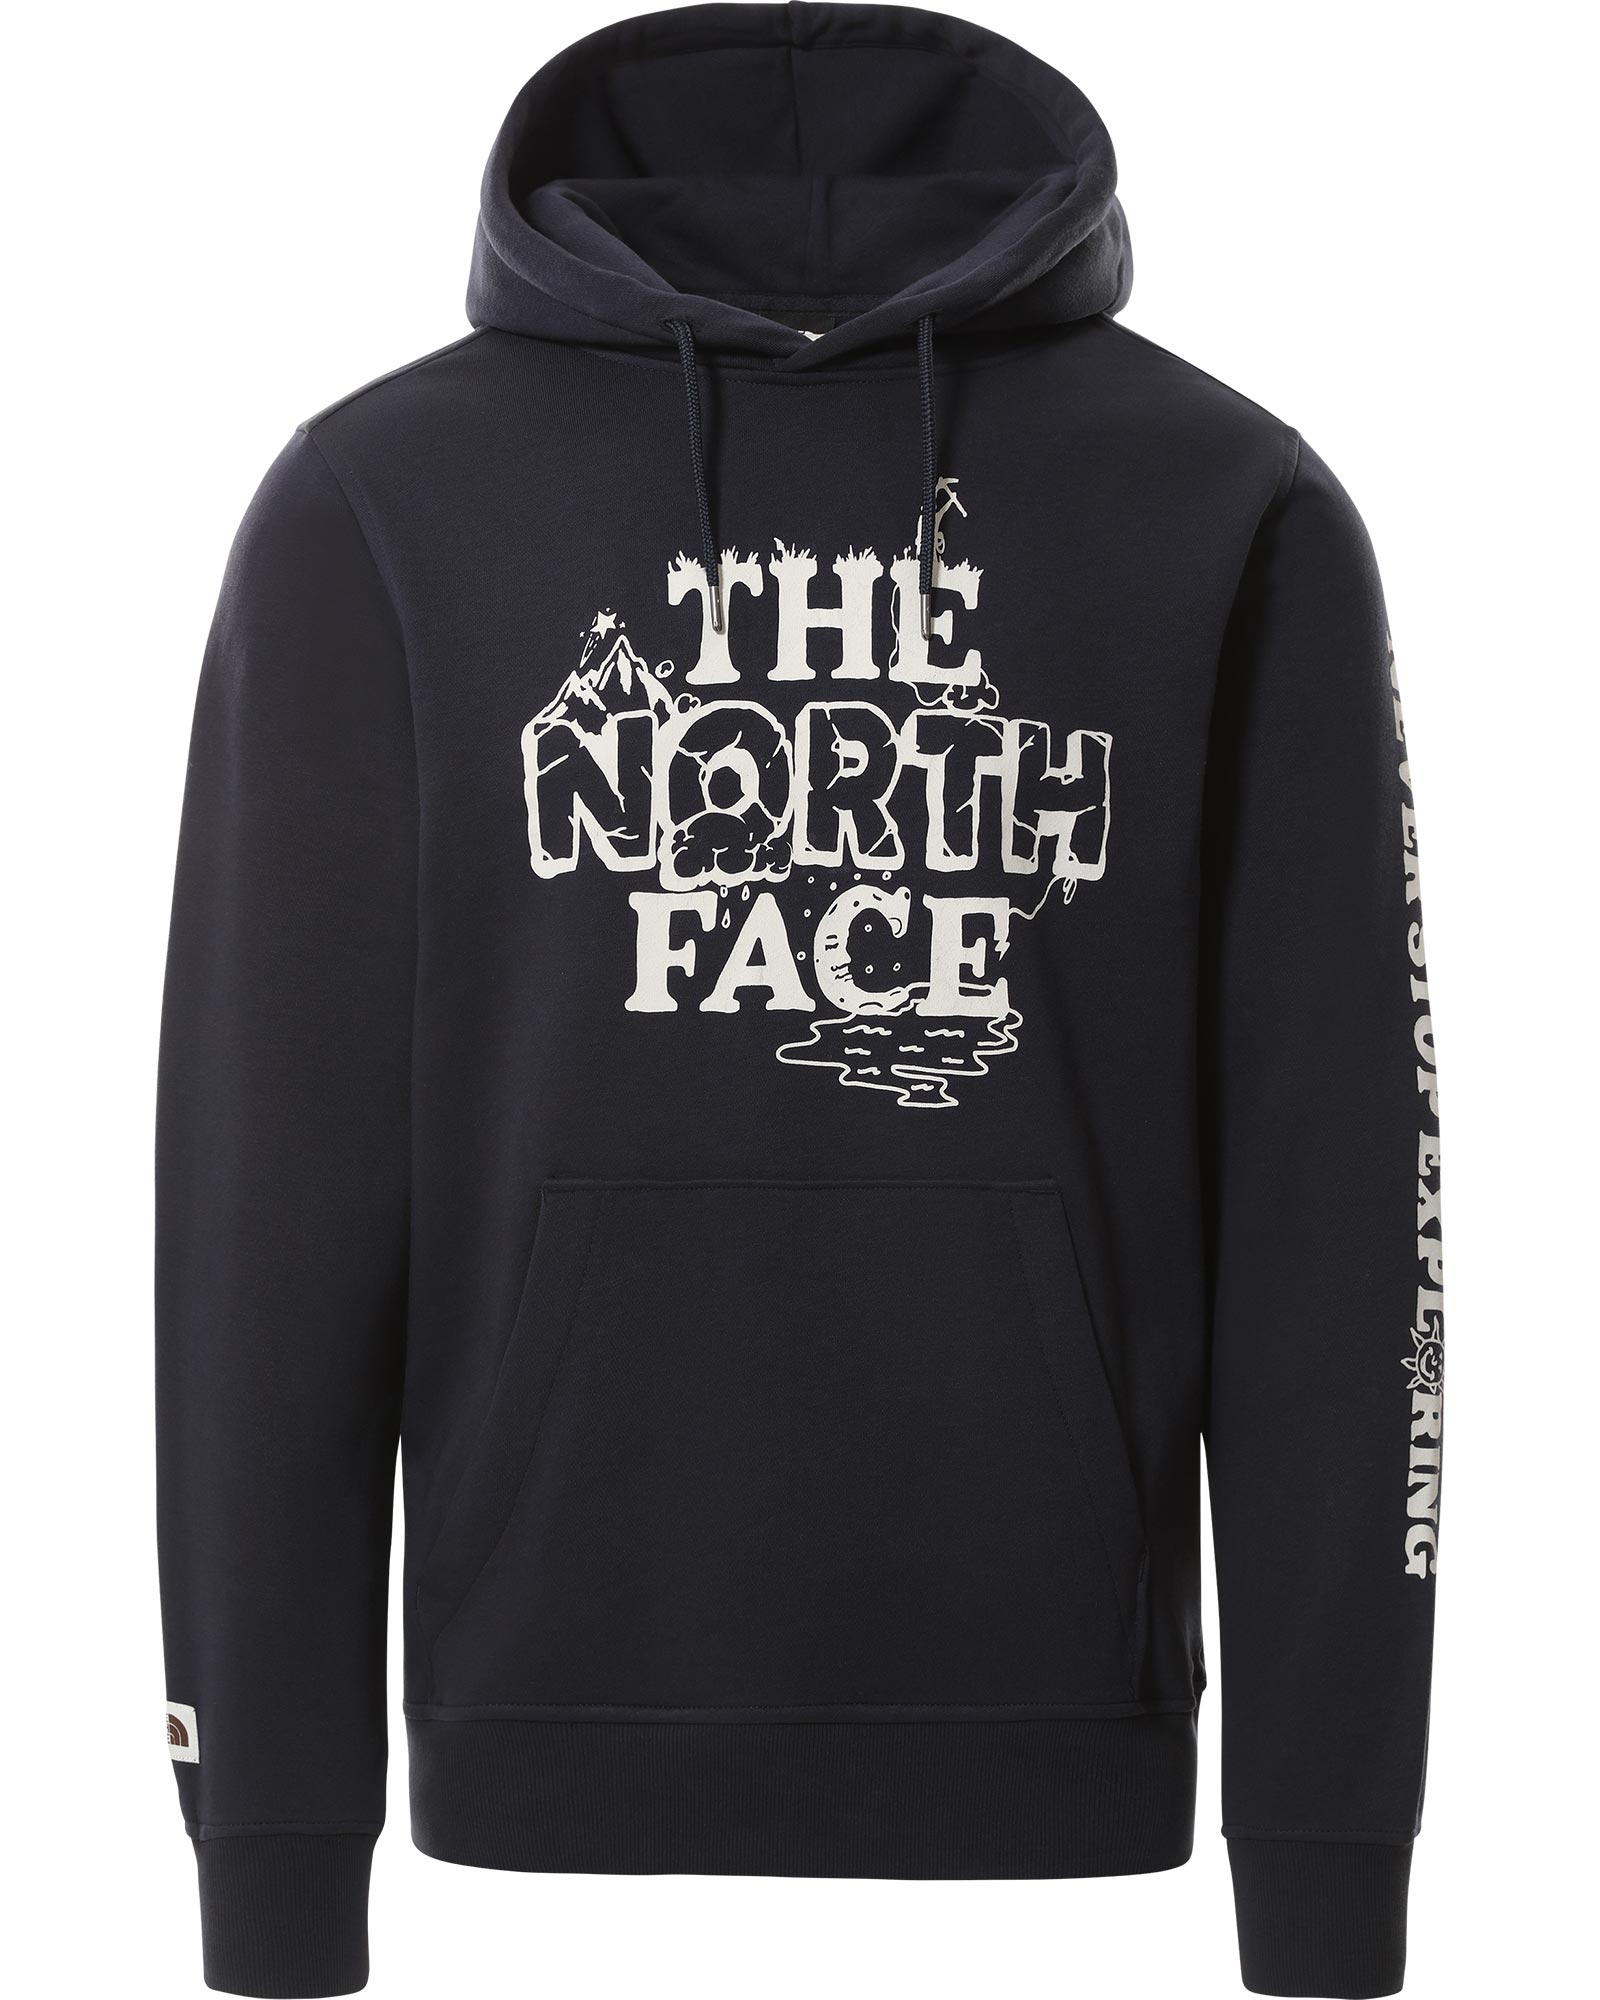 The North Face Himalayan Bottle Source Mens Hoodie